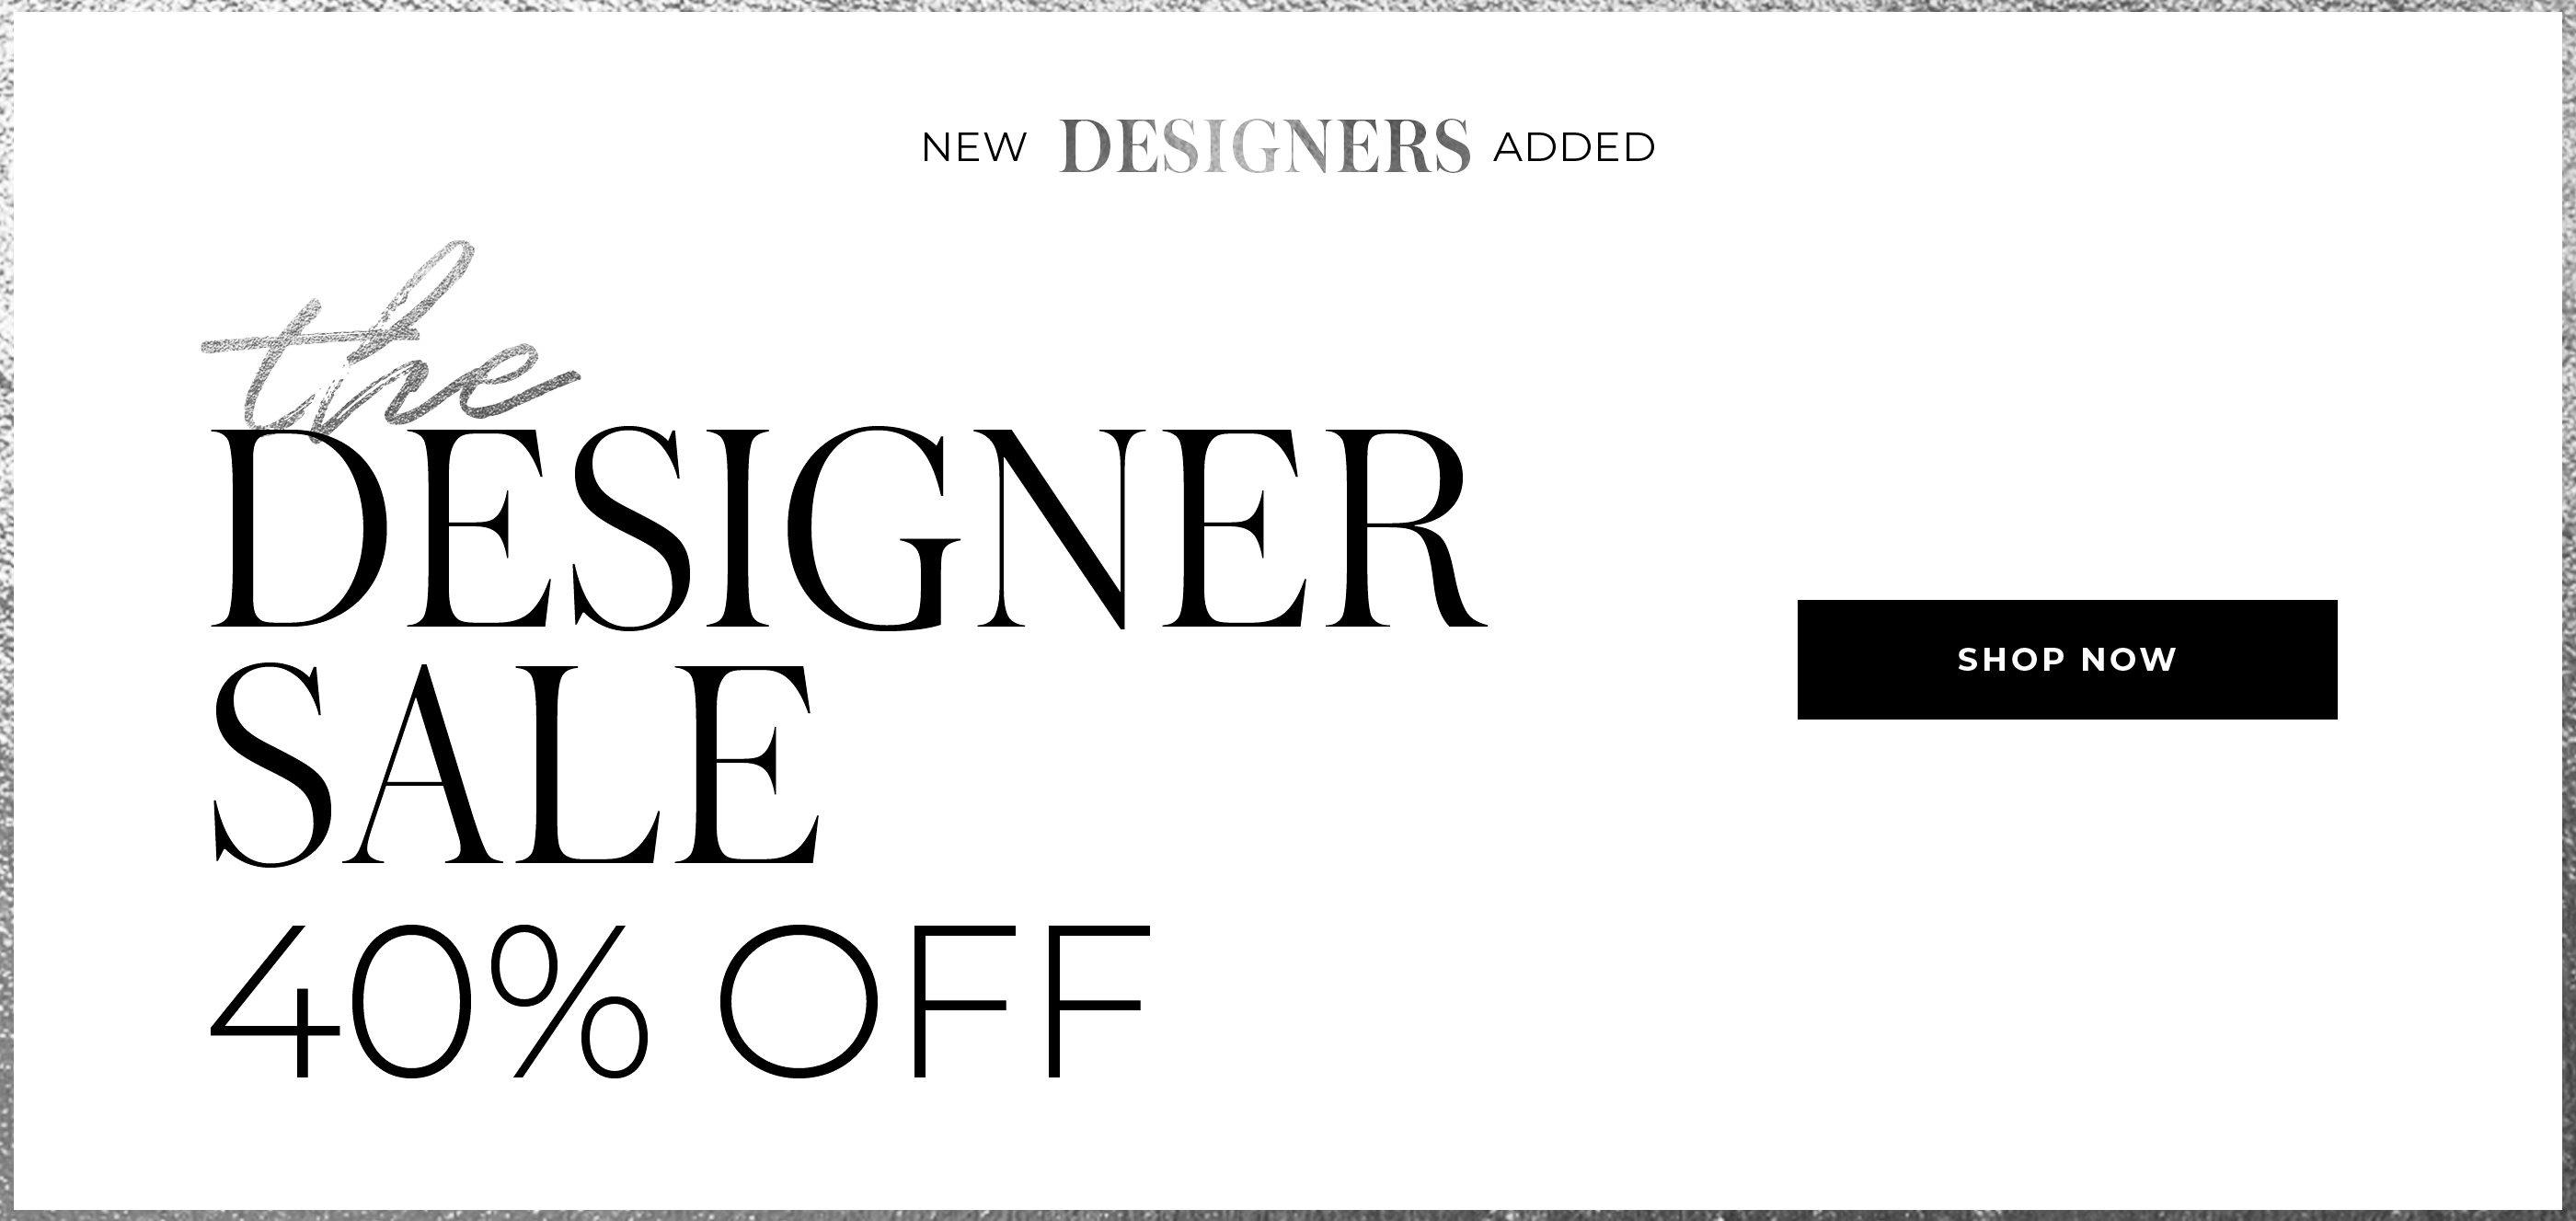 "NEW STYLES ADDED THE DESIGNER SALE 40% OFF"